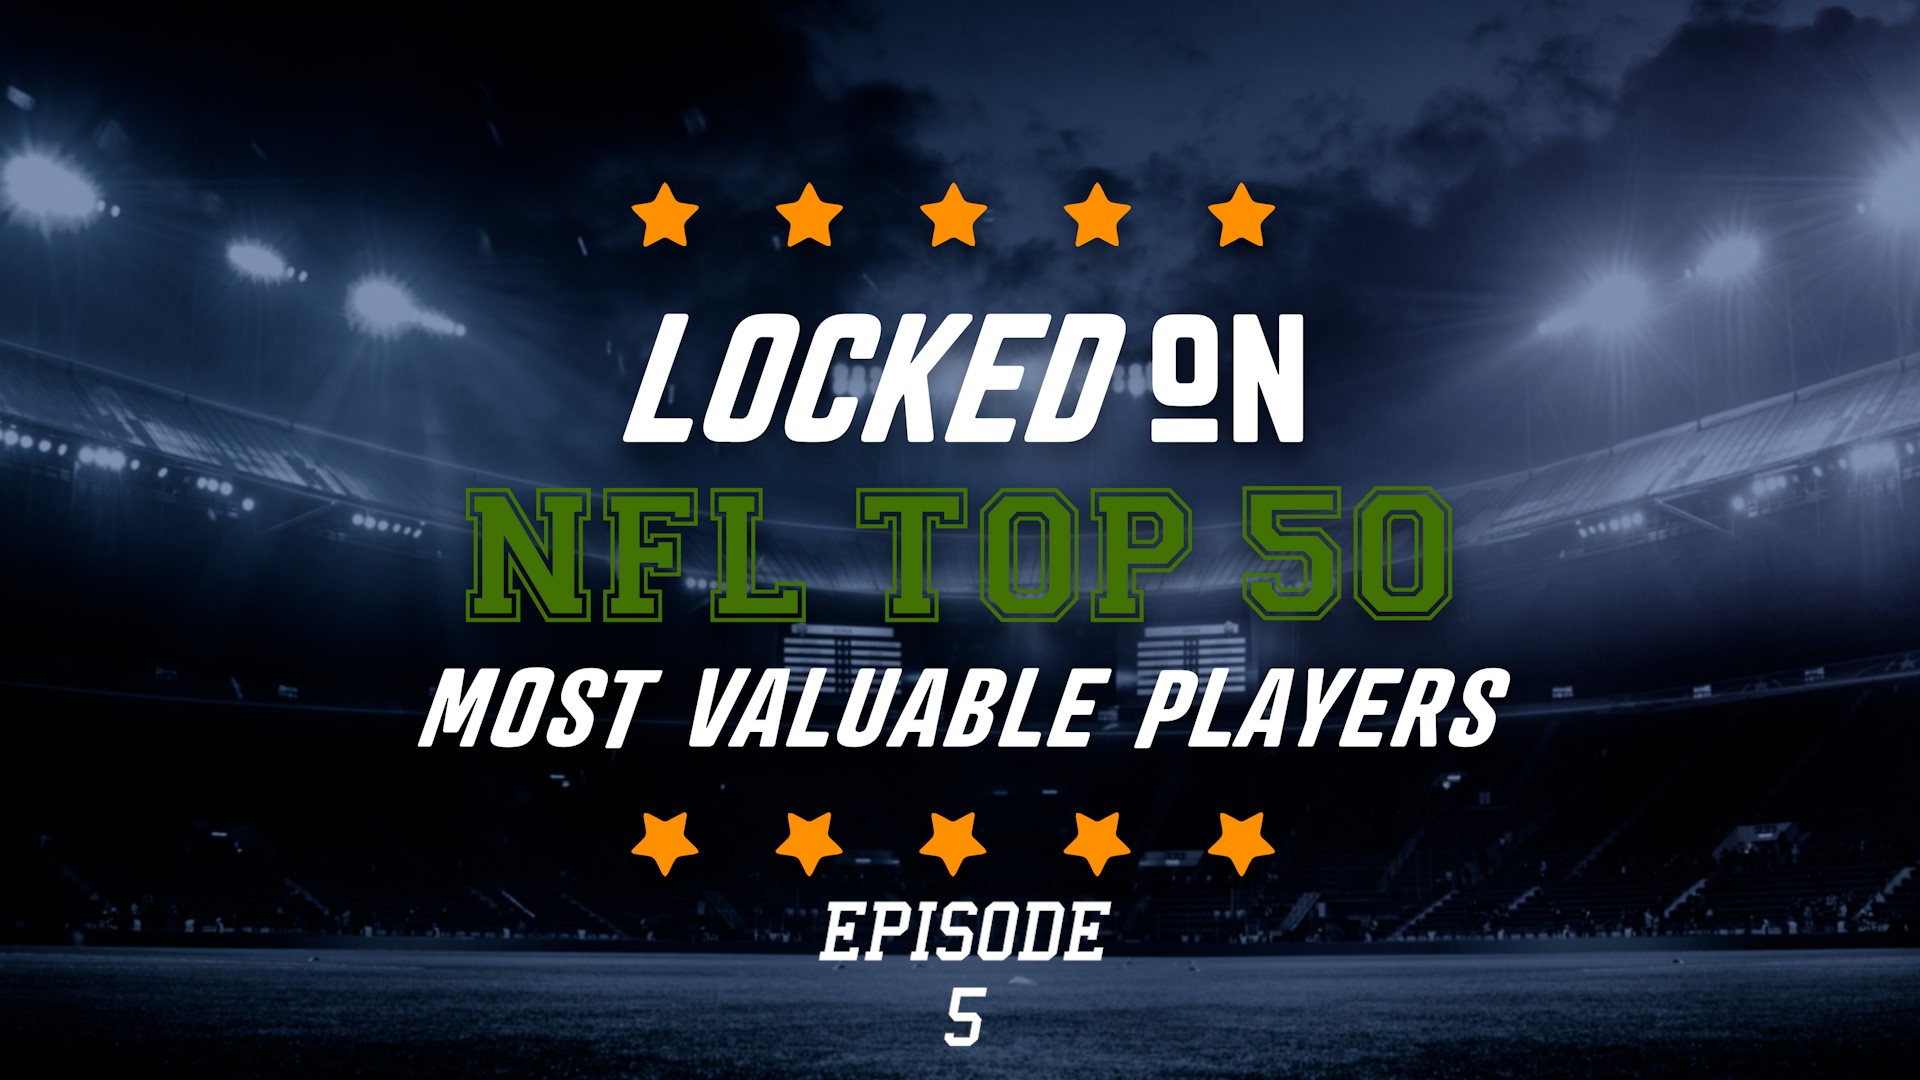 Episode 5 breaks down the most valuable players to their teams, according to BetOnline